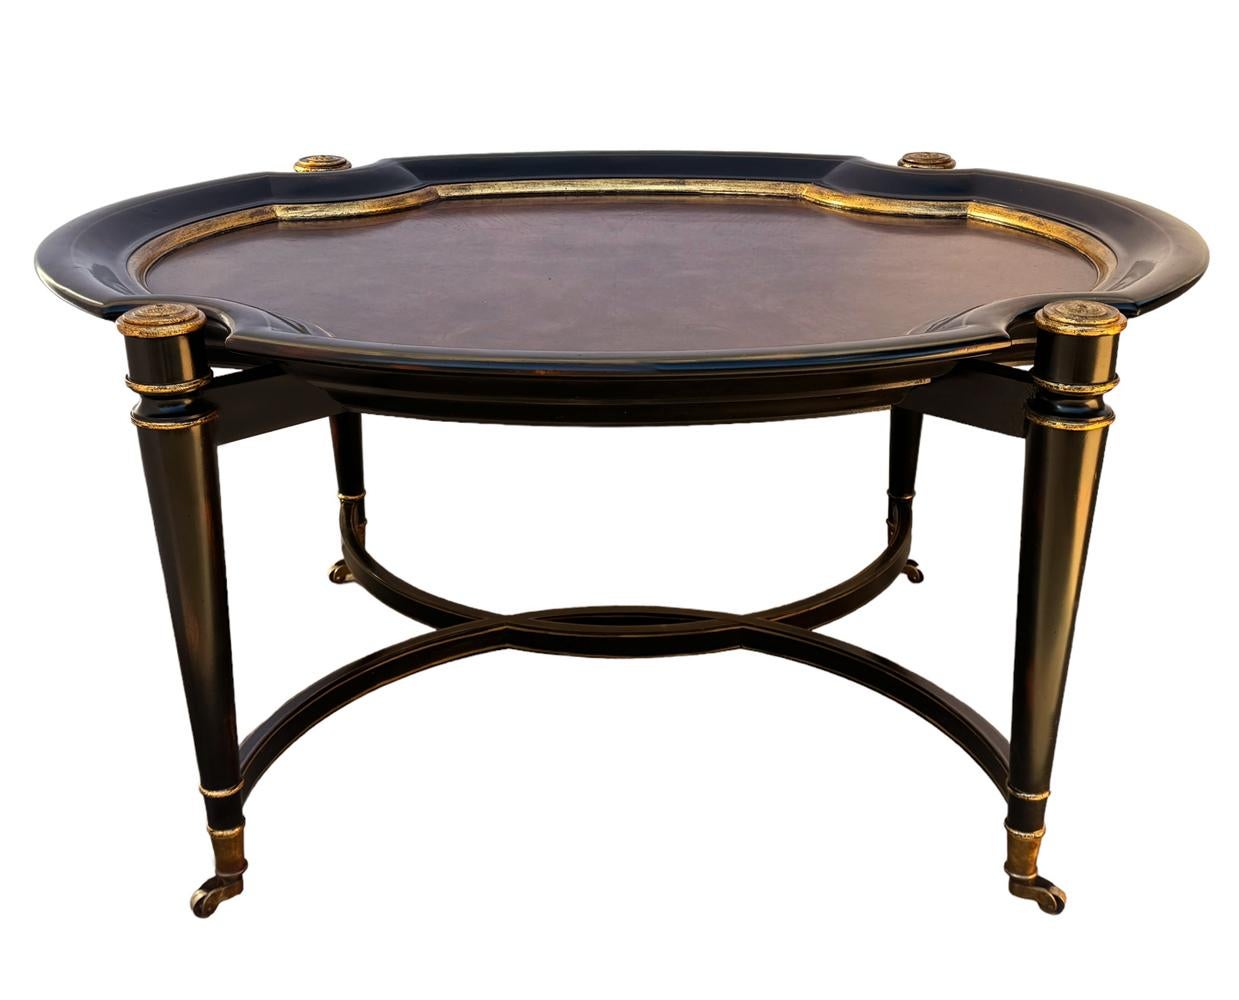 Late 20th Century Hollywood Regency Burl Wood with Gold Trim Oval Cocktail Table by Maitland Smith For Sale